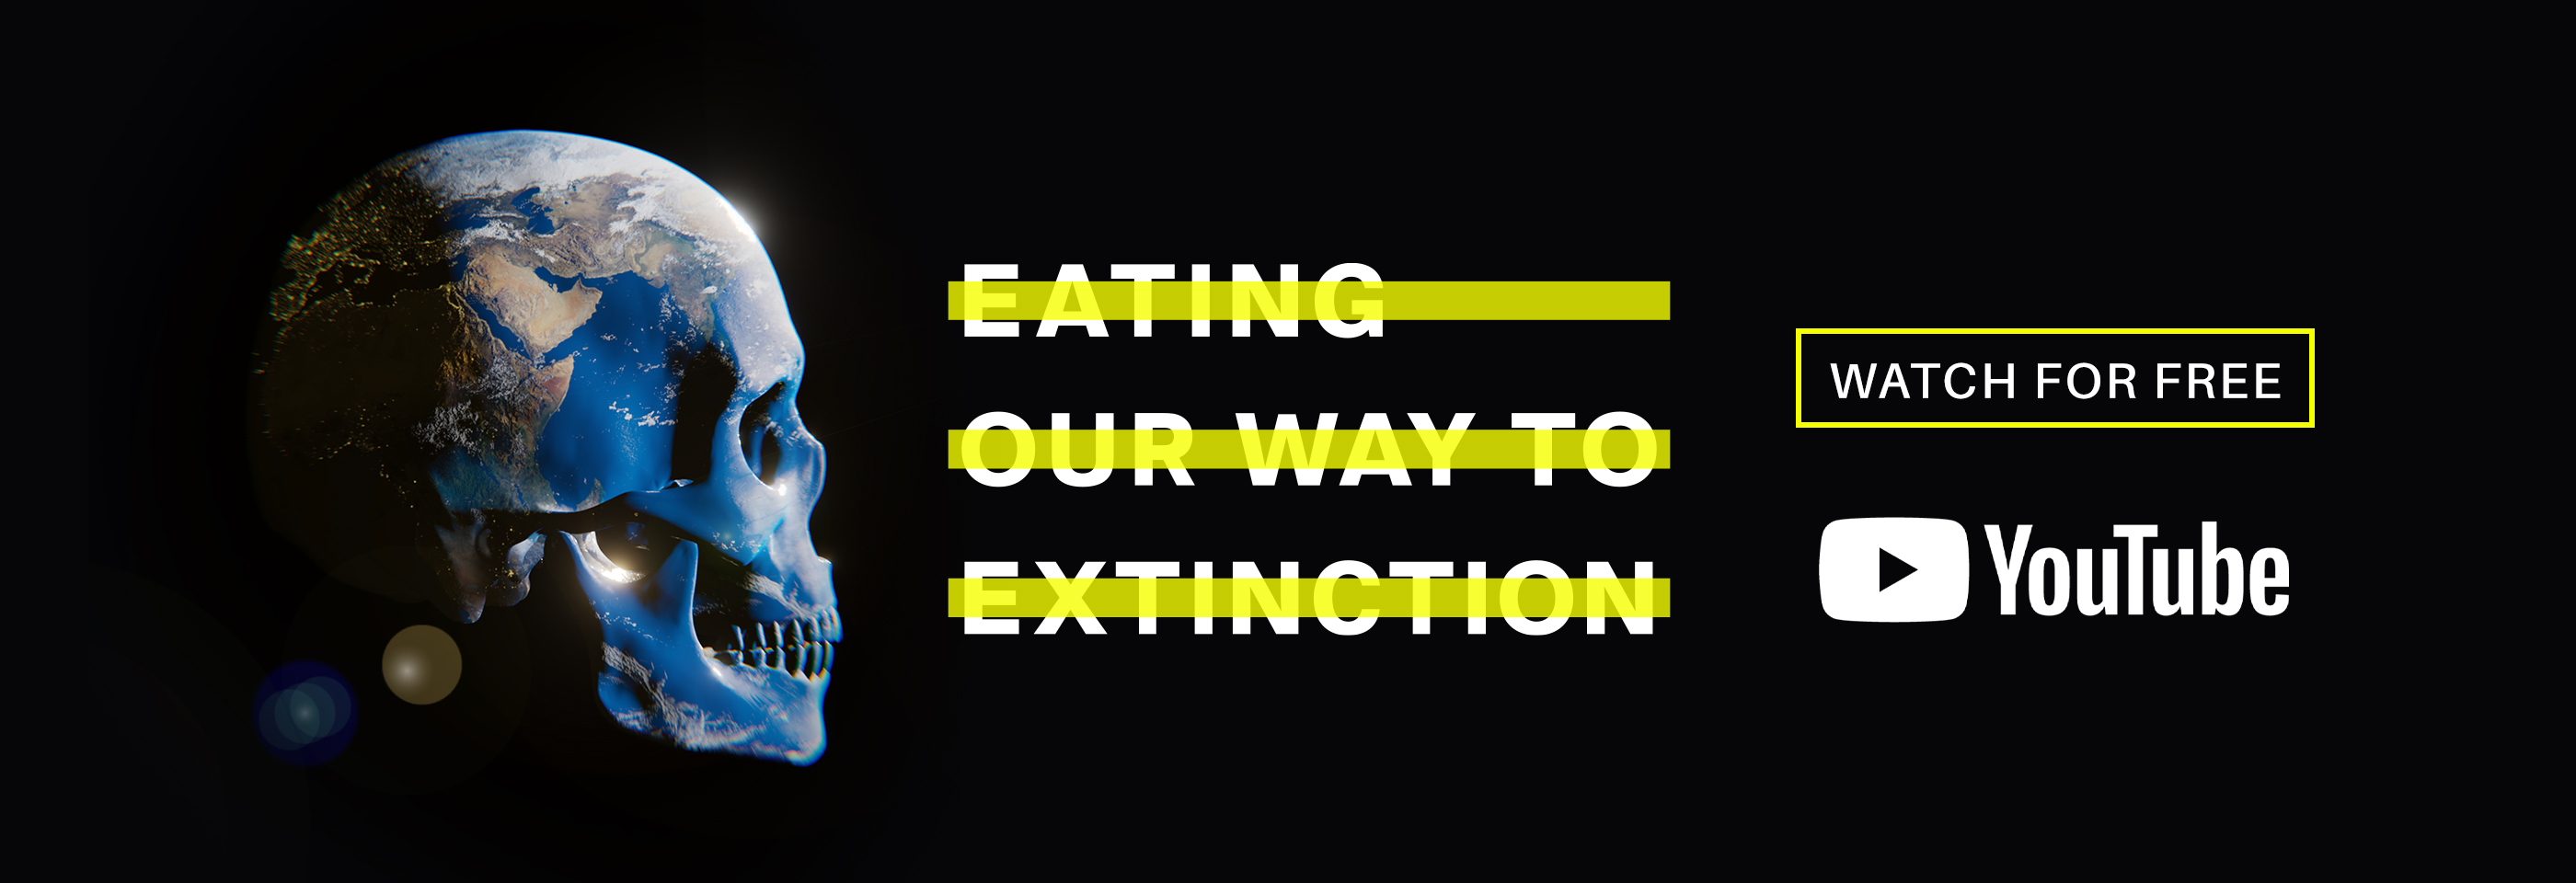 EATING OUR WAY TO EXTINCTION - Youtube Video